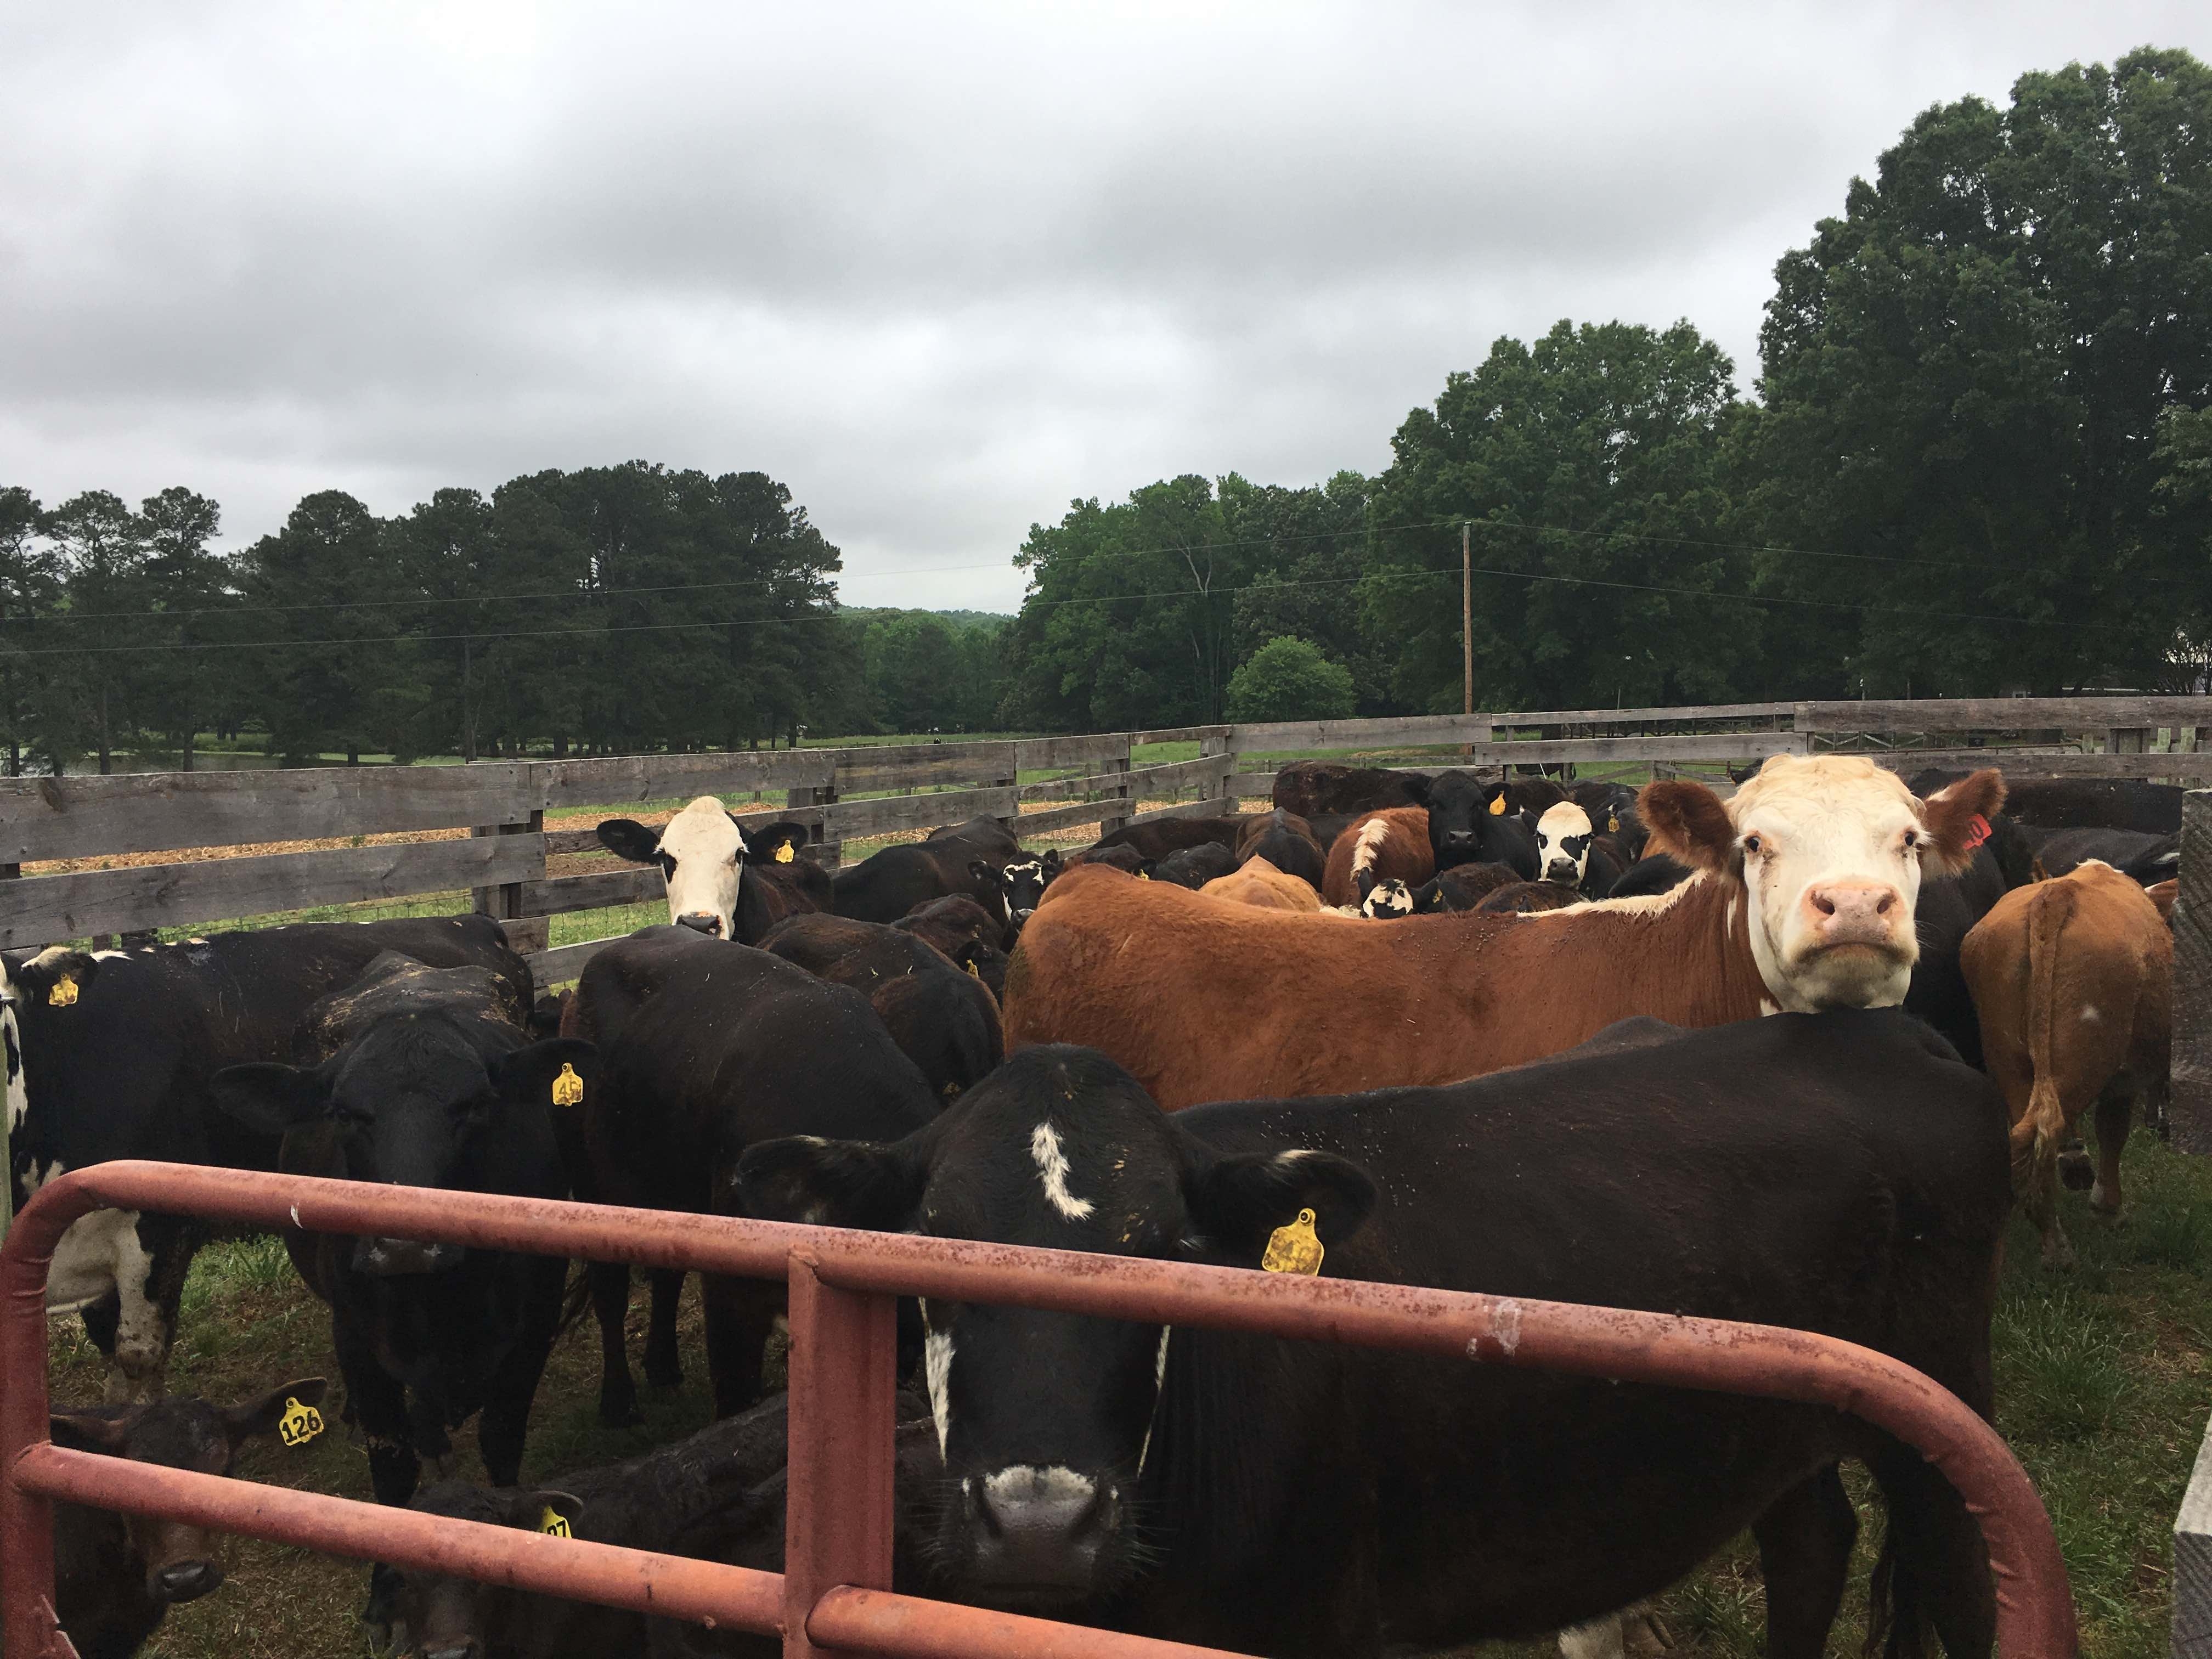 Cows in the corral, waiting to be sorted